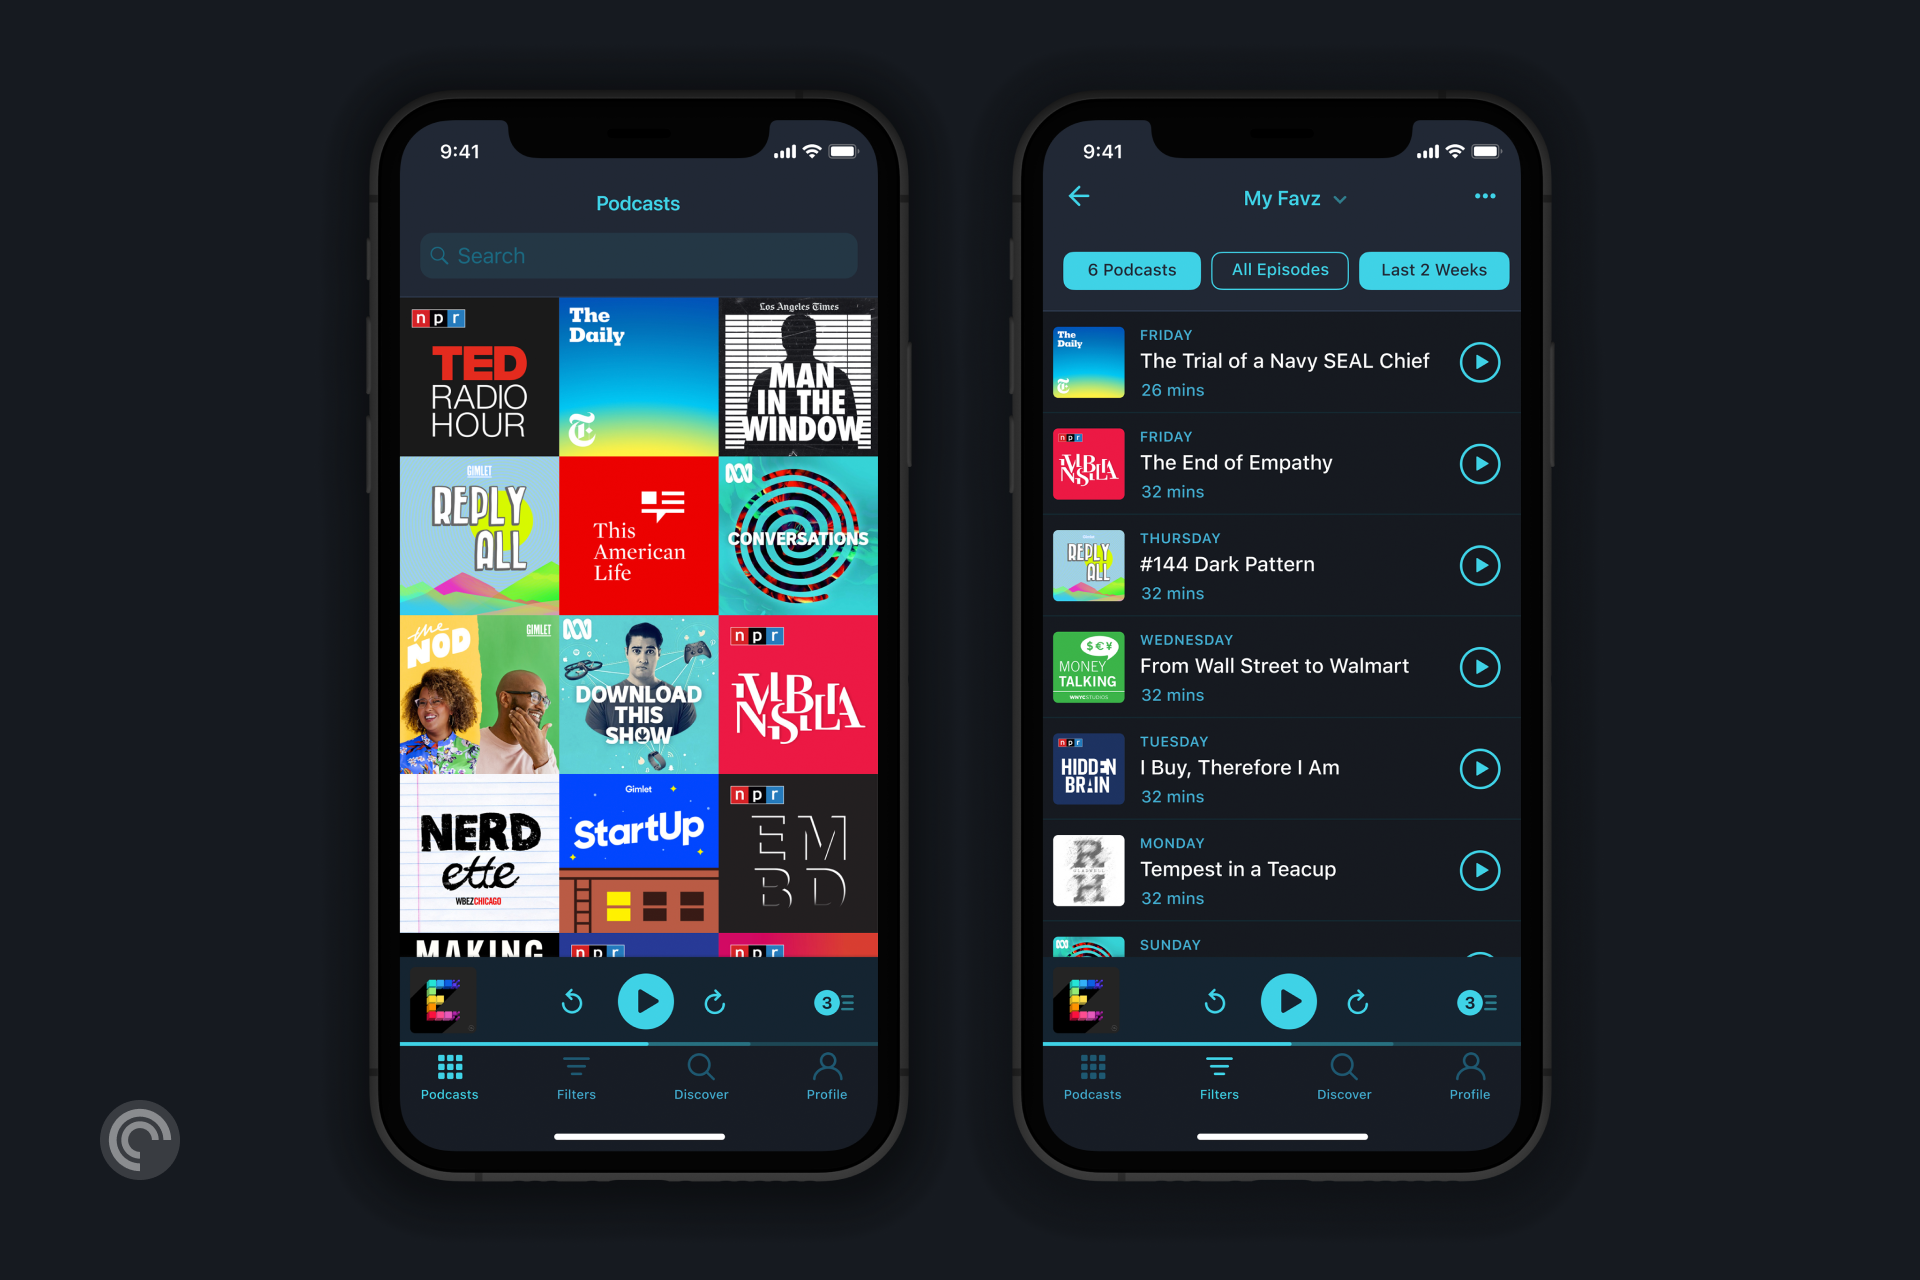 Pocket Casts’ podcast app is now free to use